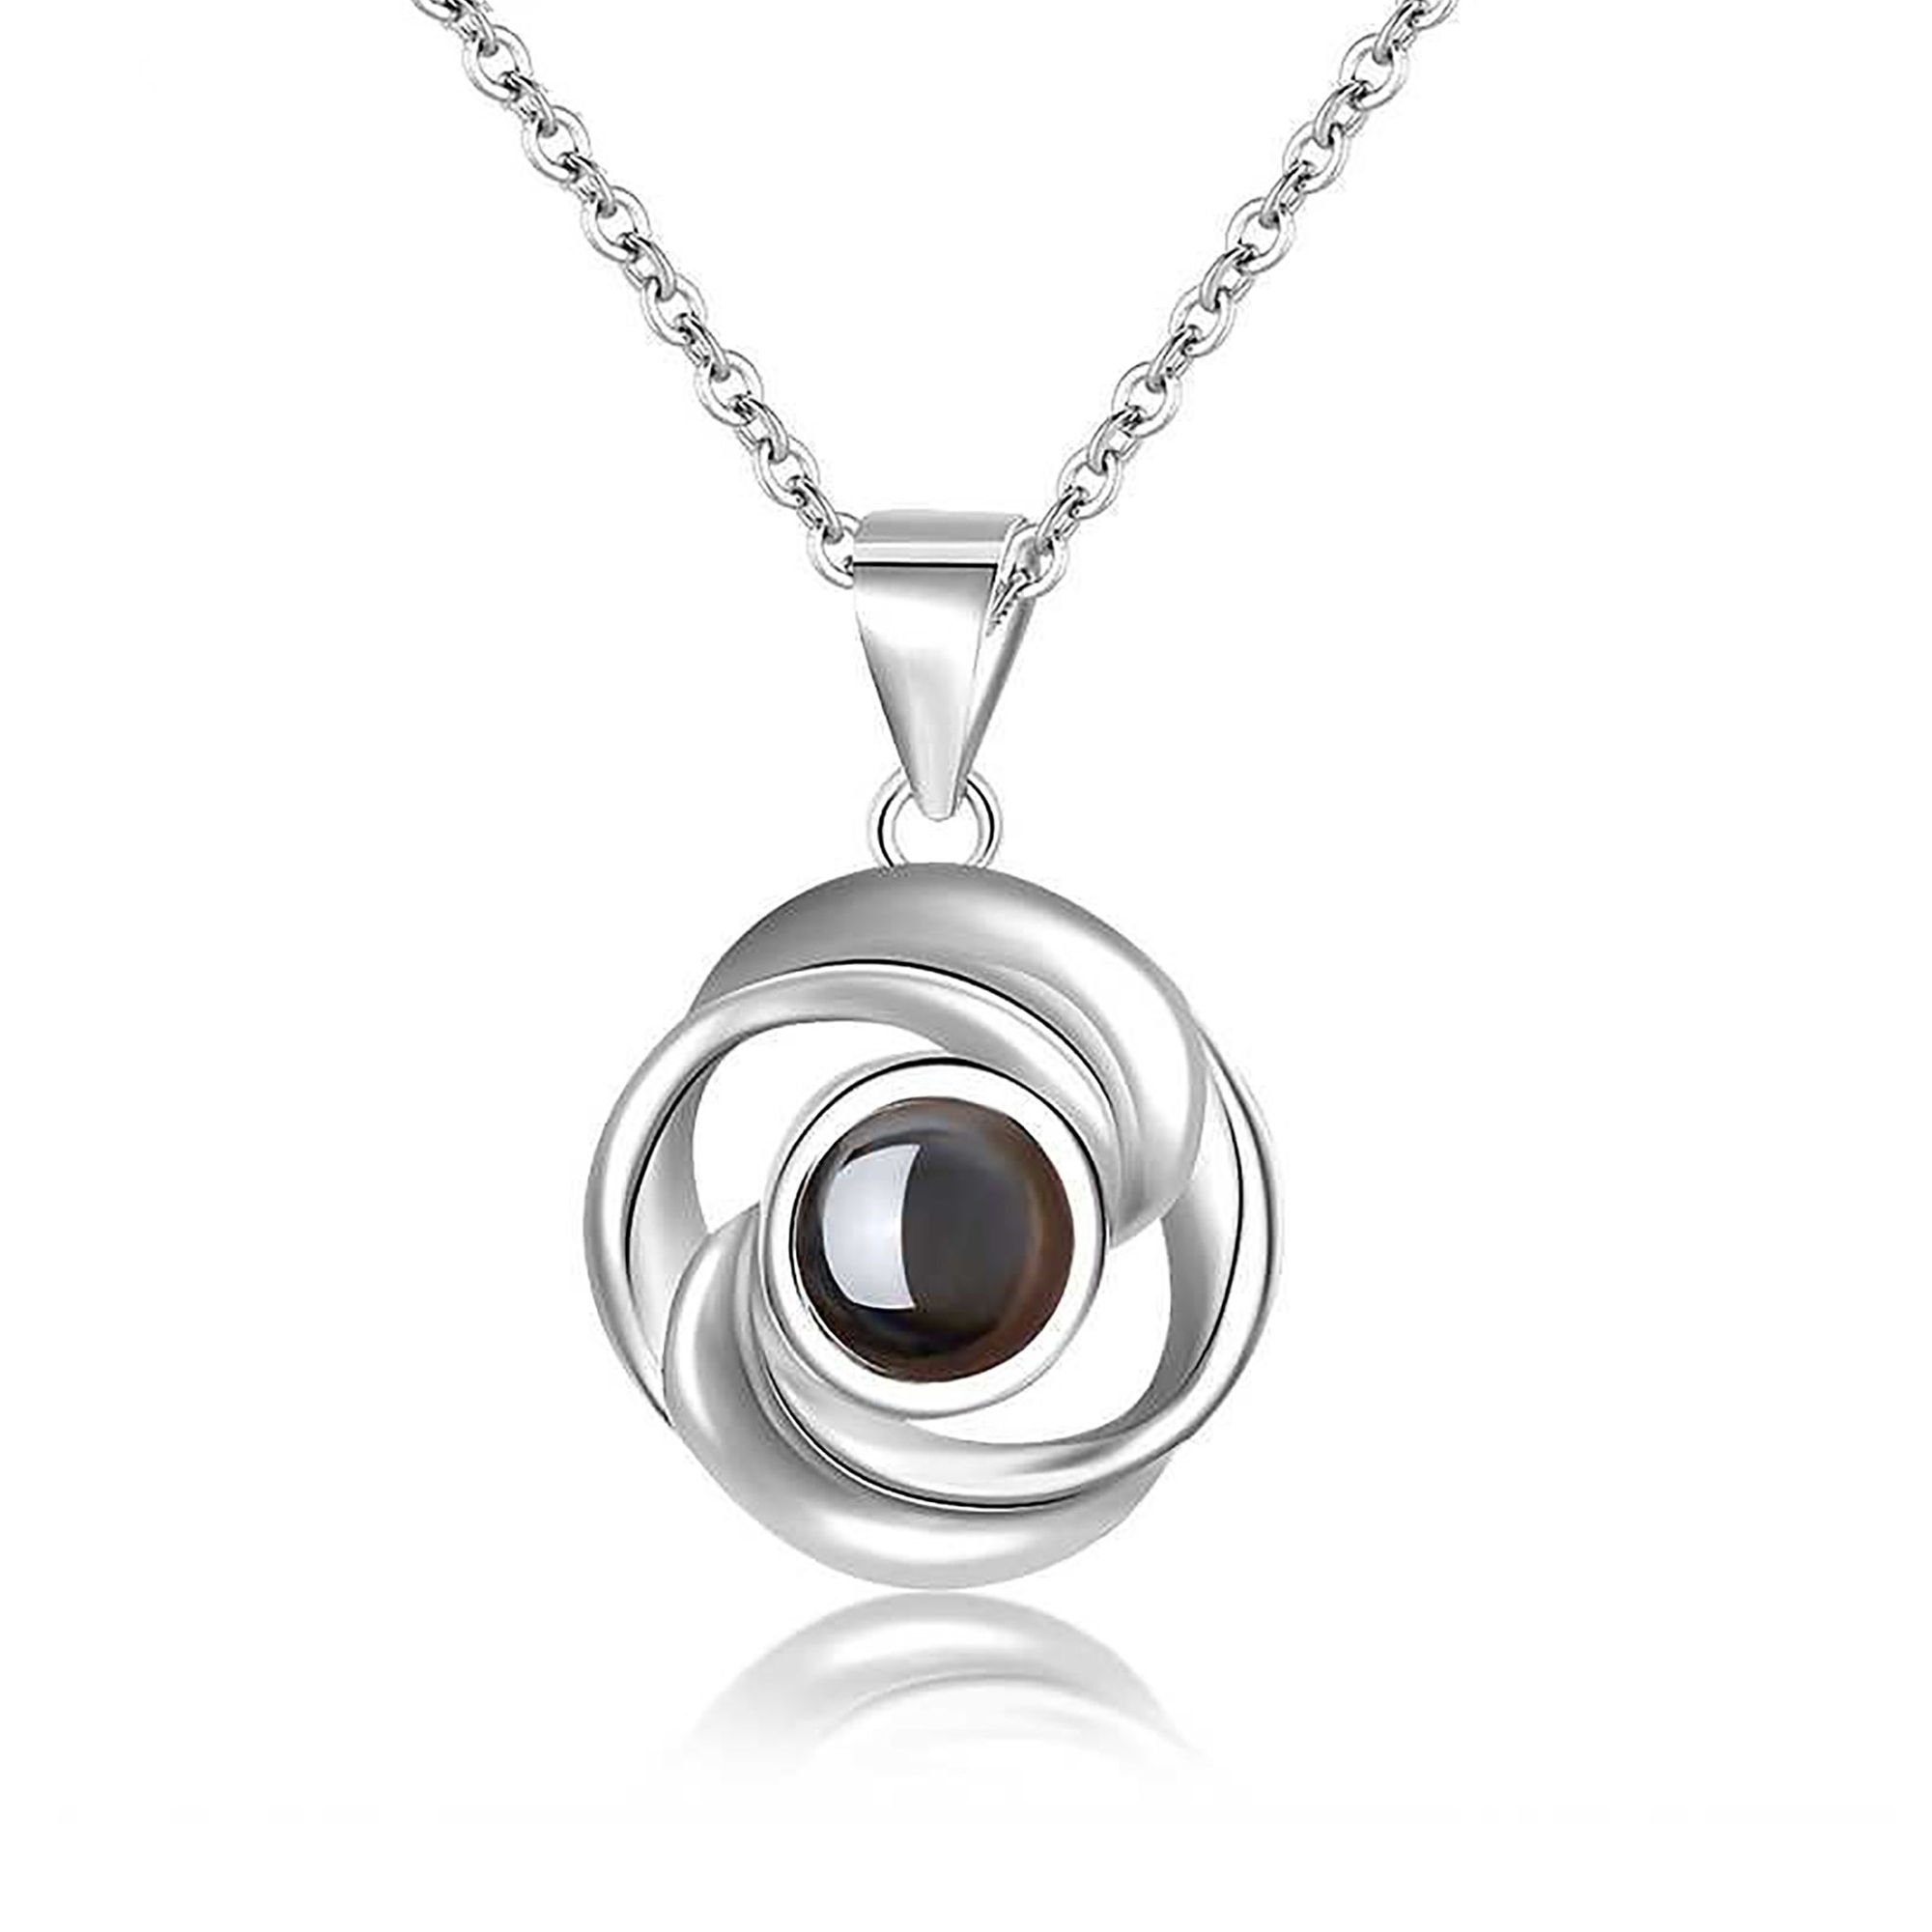 Personalized Exquisite Rotate Circle Photo Necklace